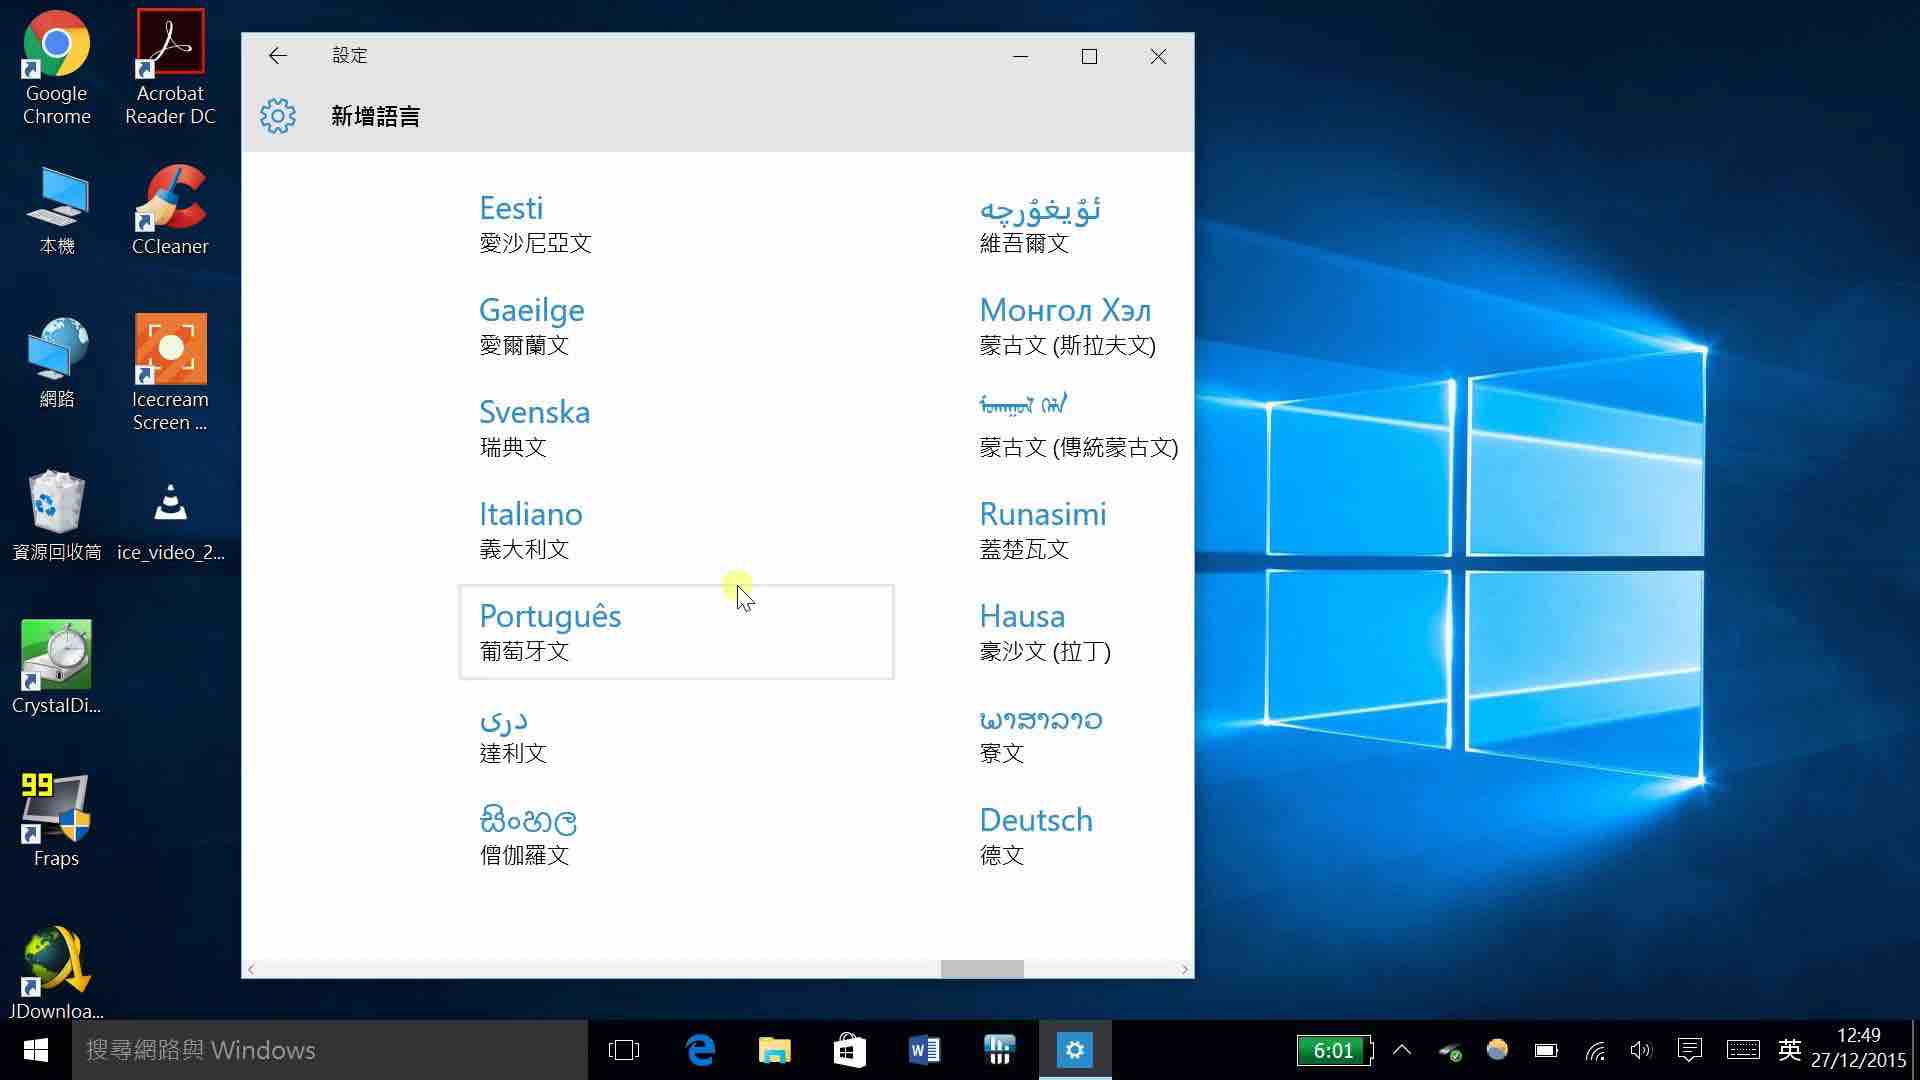 Microsoft Makes Special Windows 10 “Zhuangongban Edition” For Chinese Government